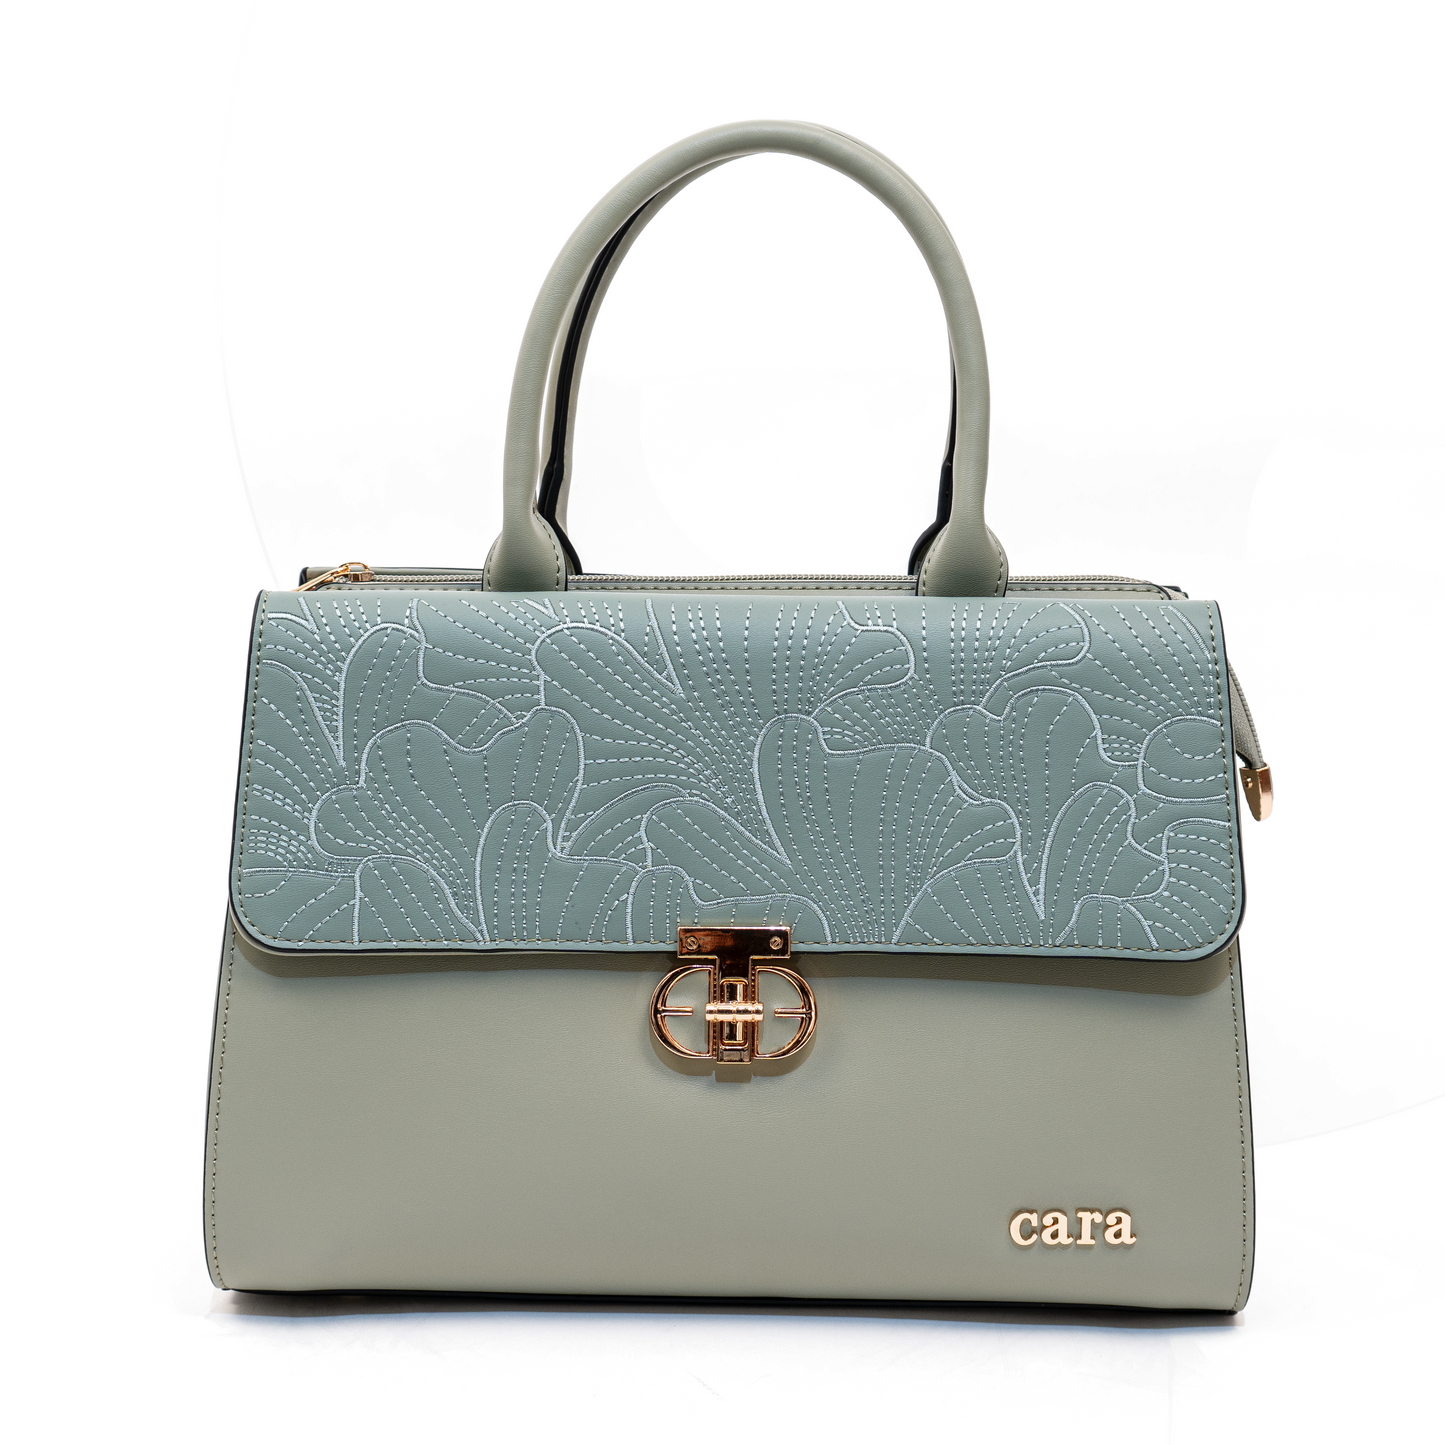 Stylish Hand Bag Collection From Cara